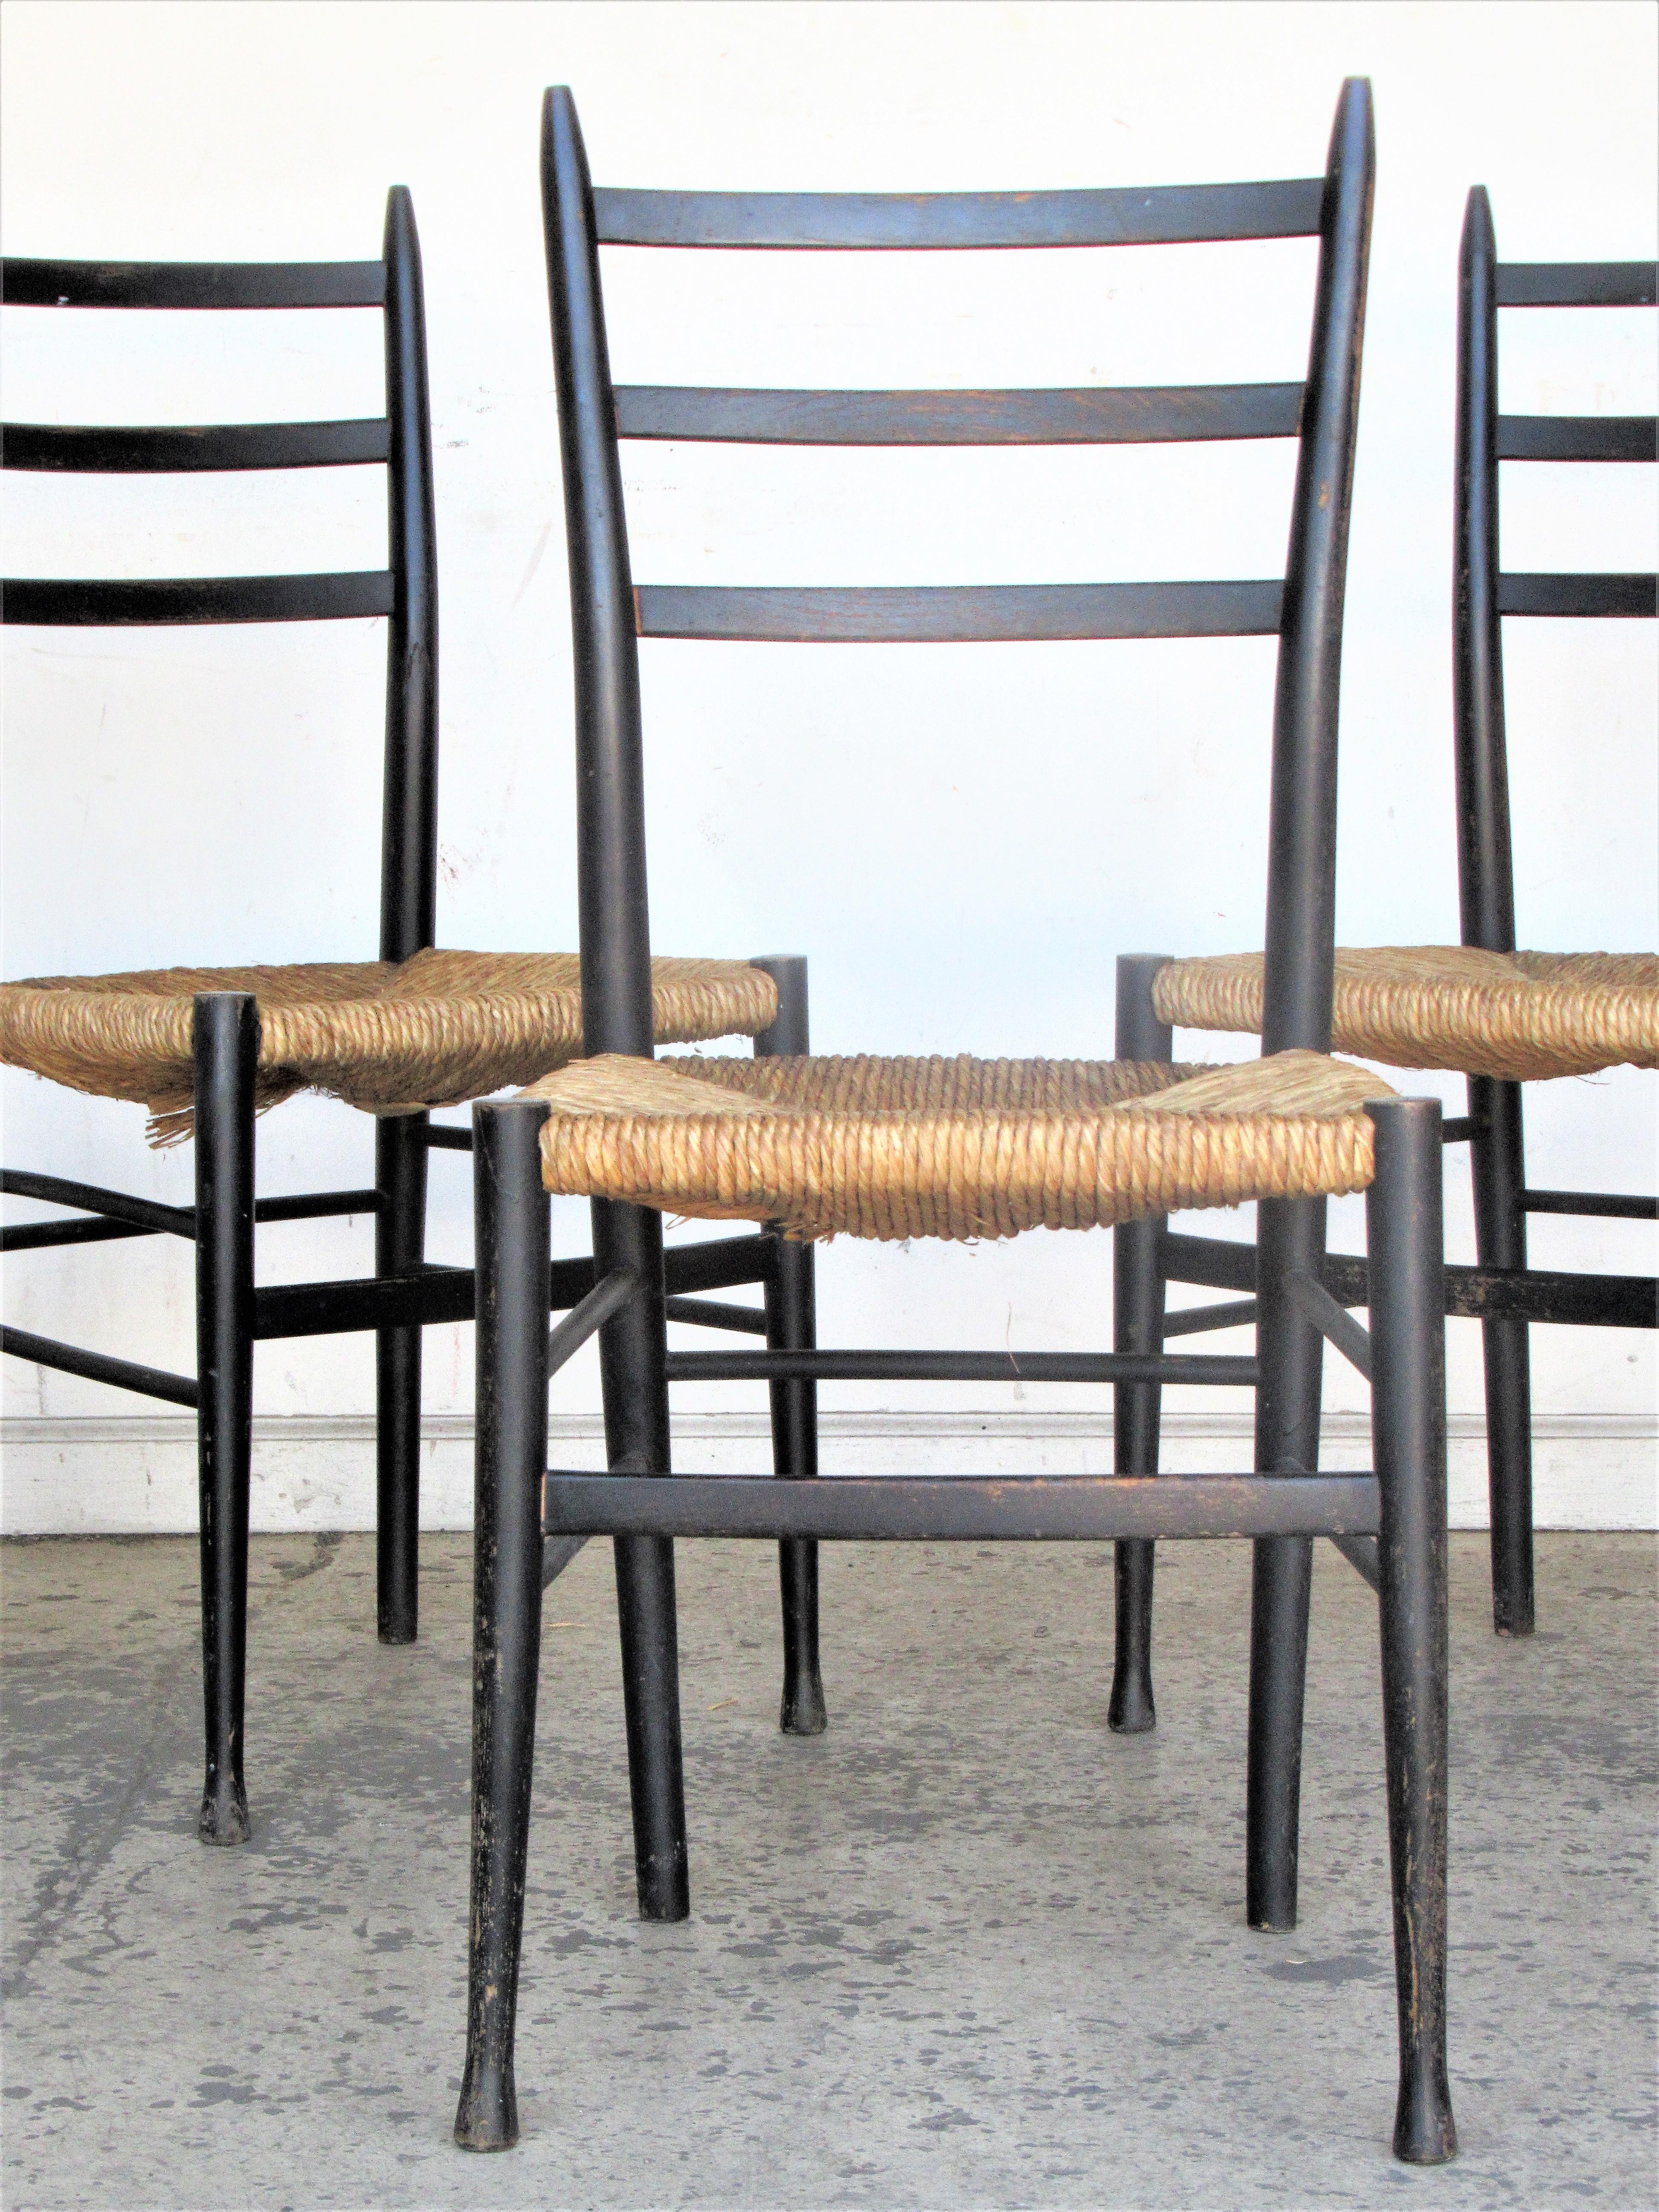 A set of three Gio Ponti Superleggera Chiavari style side / dining chairs with the original woven rush seats and ebonized lacquered surface. One chair with paper label on underside - Made in Italy and instructions for cleaning rush seats. Circa